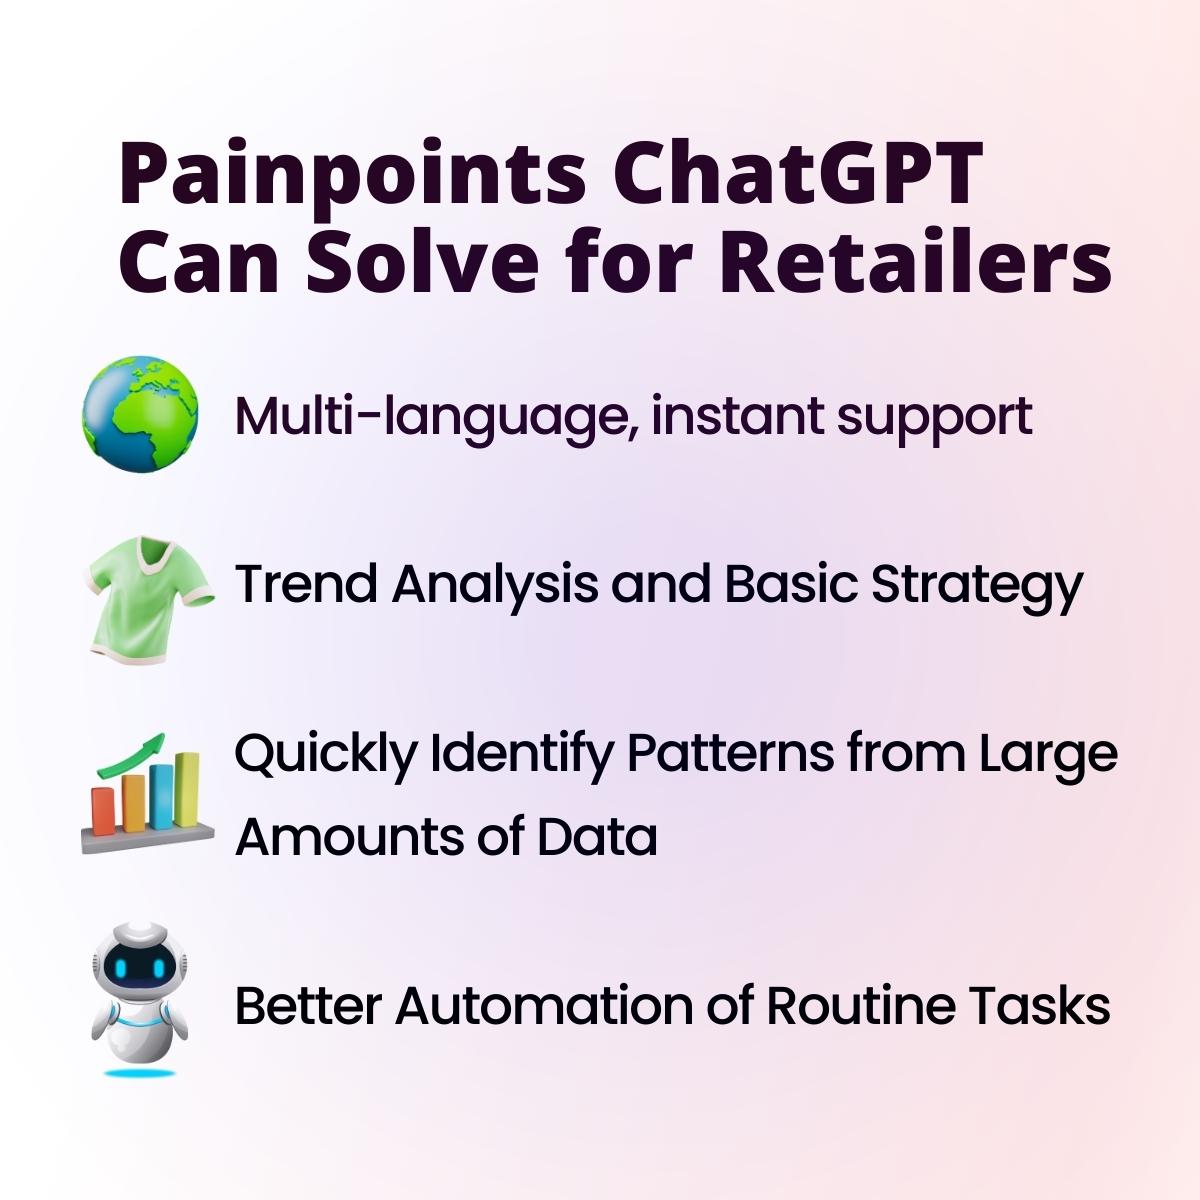 Painpoints ChatGPT is solving for retailers